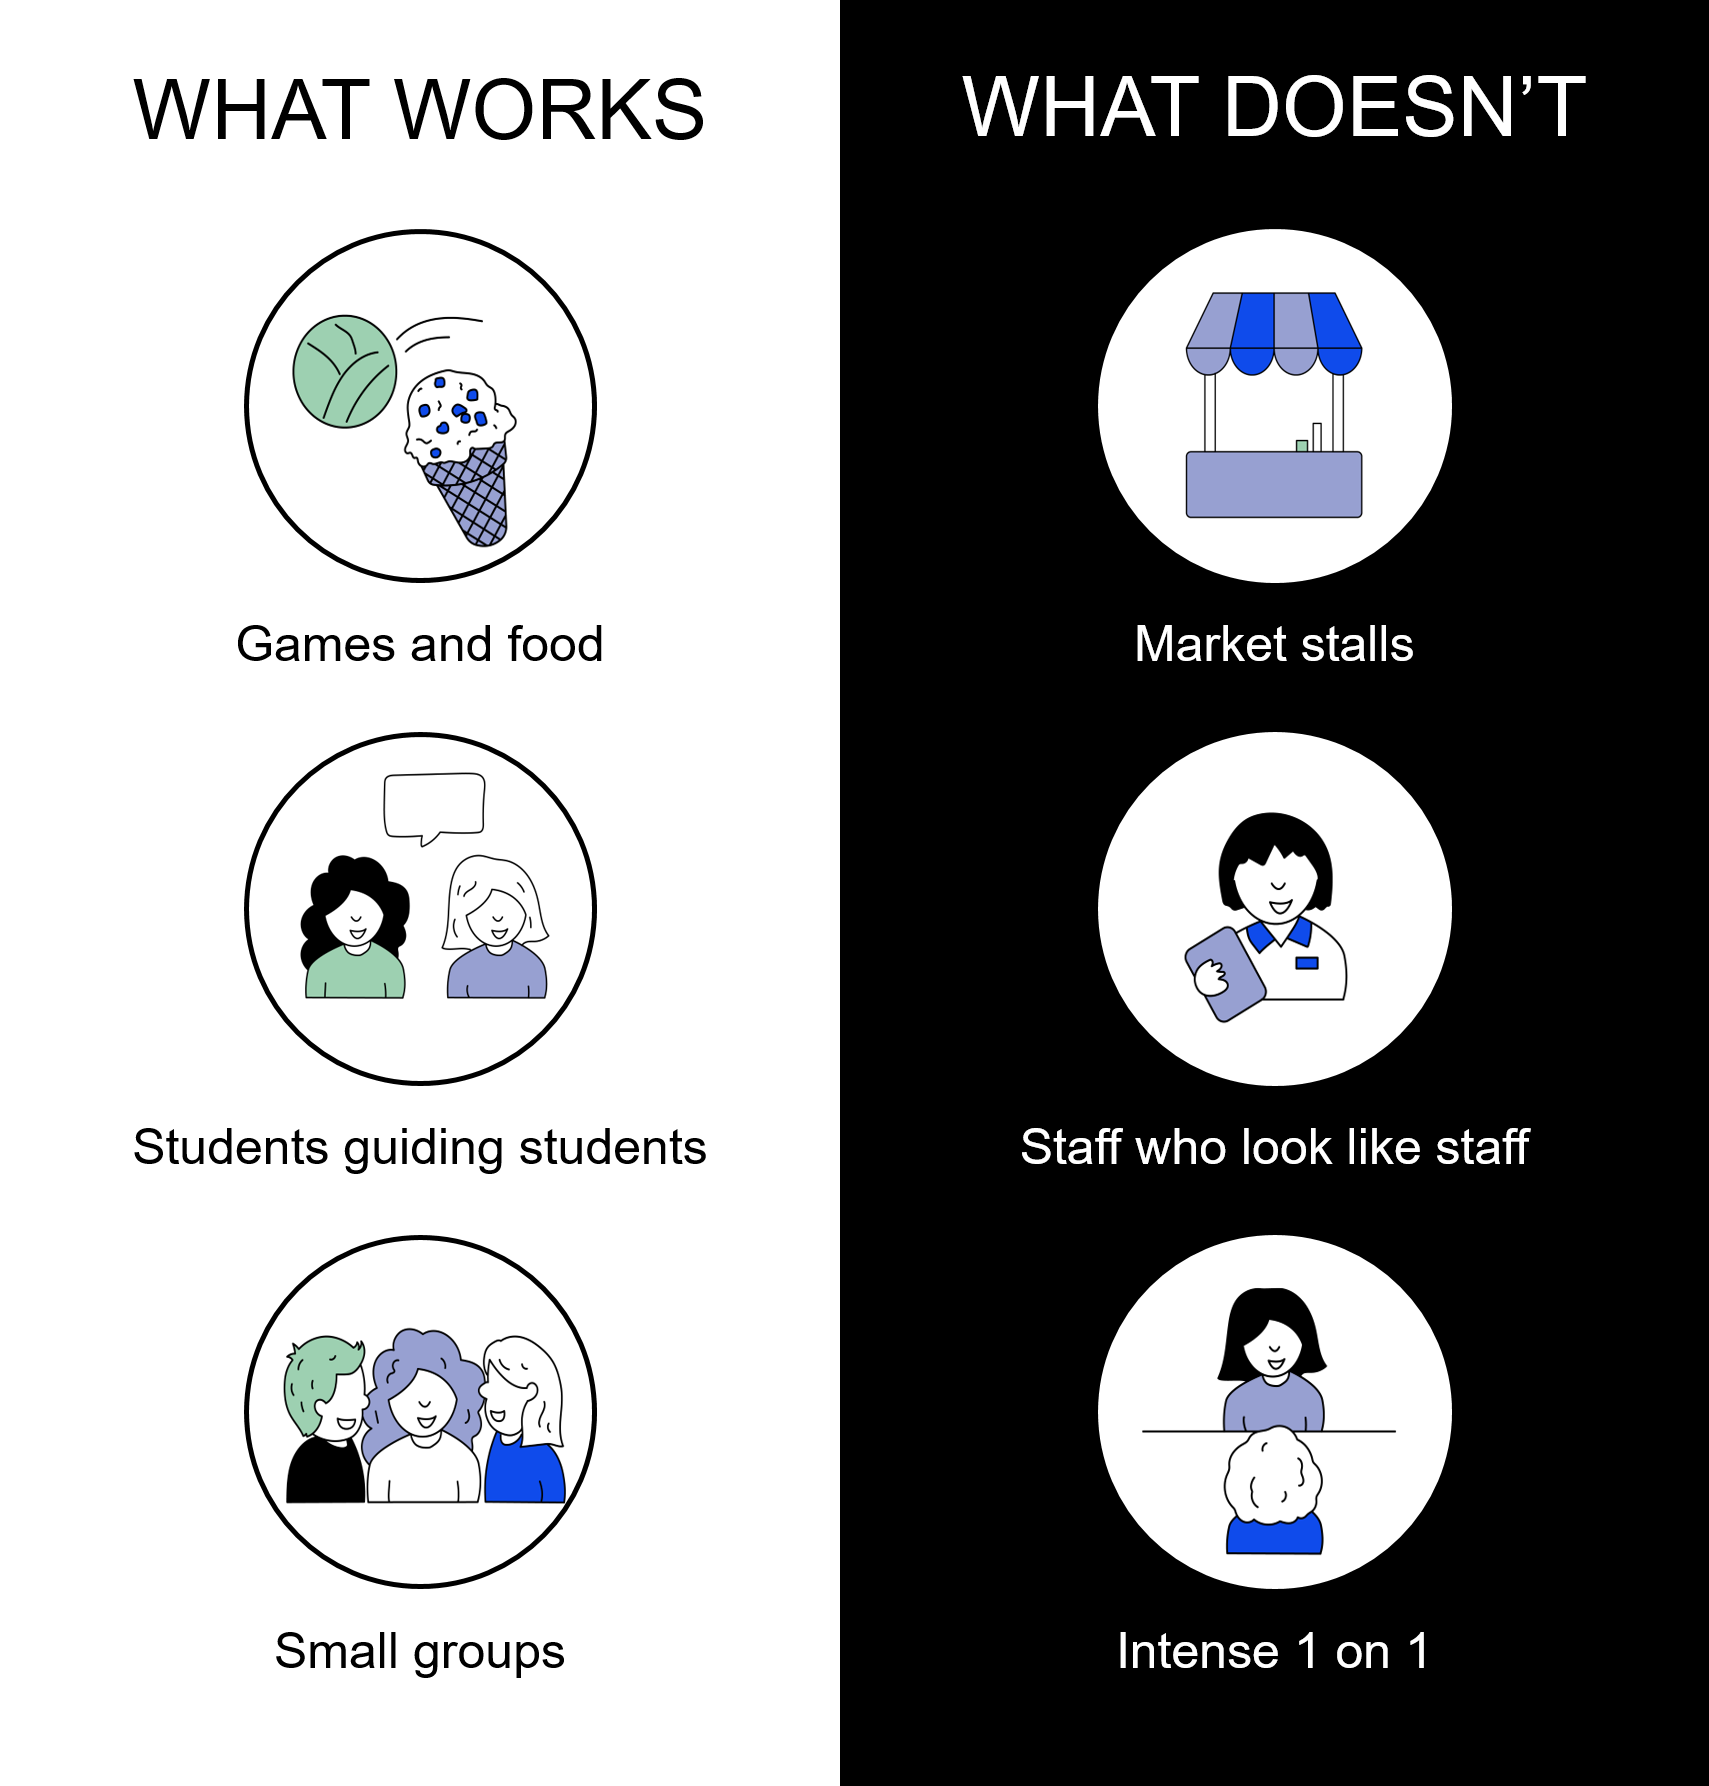 A chart with two columns with icons for each listed item. First column says what works: Games and food, Students guiding students, small groups. Second column reads What doesn't: Market stalls, staff who look like staff, Intense 1 on 1.